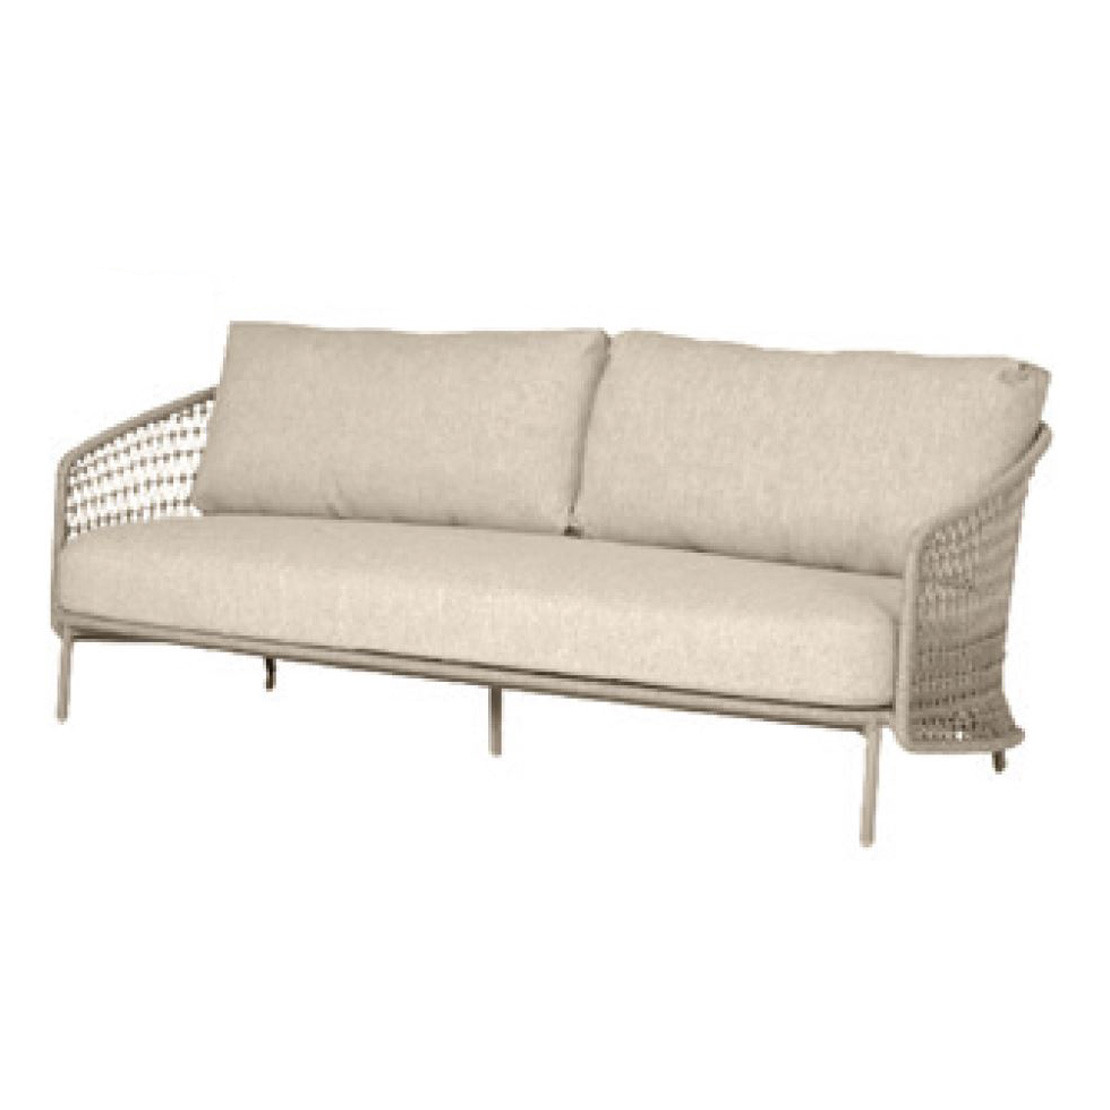 Puccini 3 seater bench latte with 3 cushions